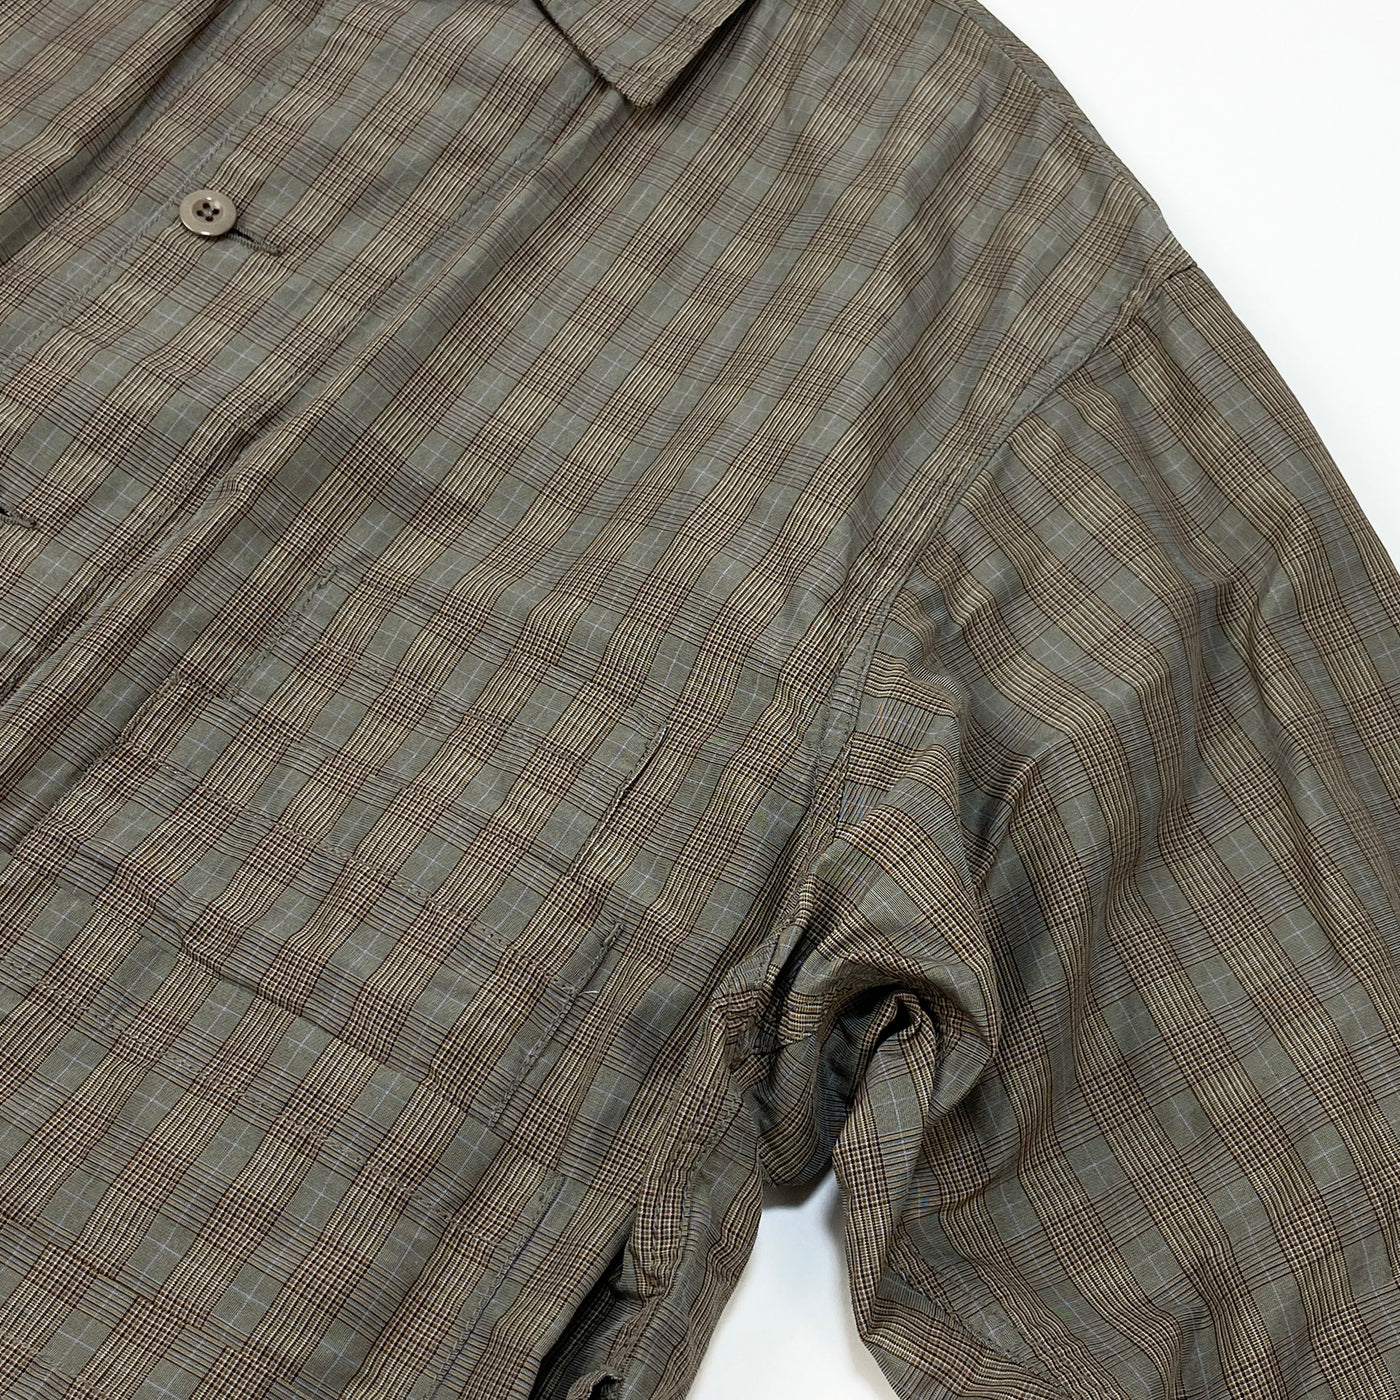 SSZ / エスエスズィー 2021SS ENERGY JACKET - BROWN CHECK 11-18-5954